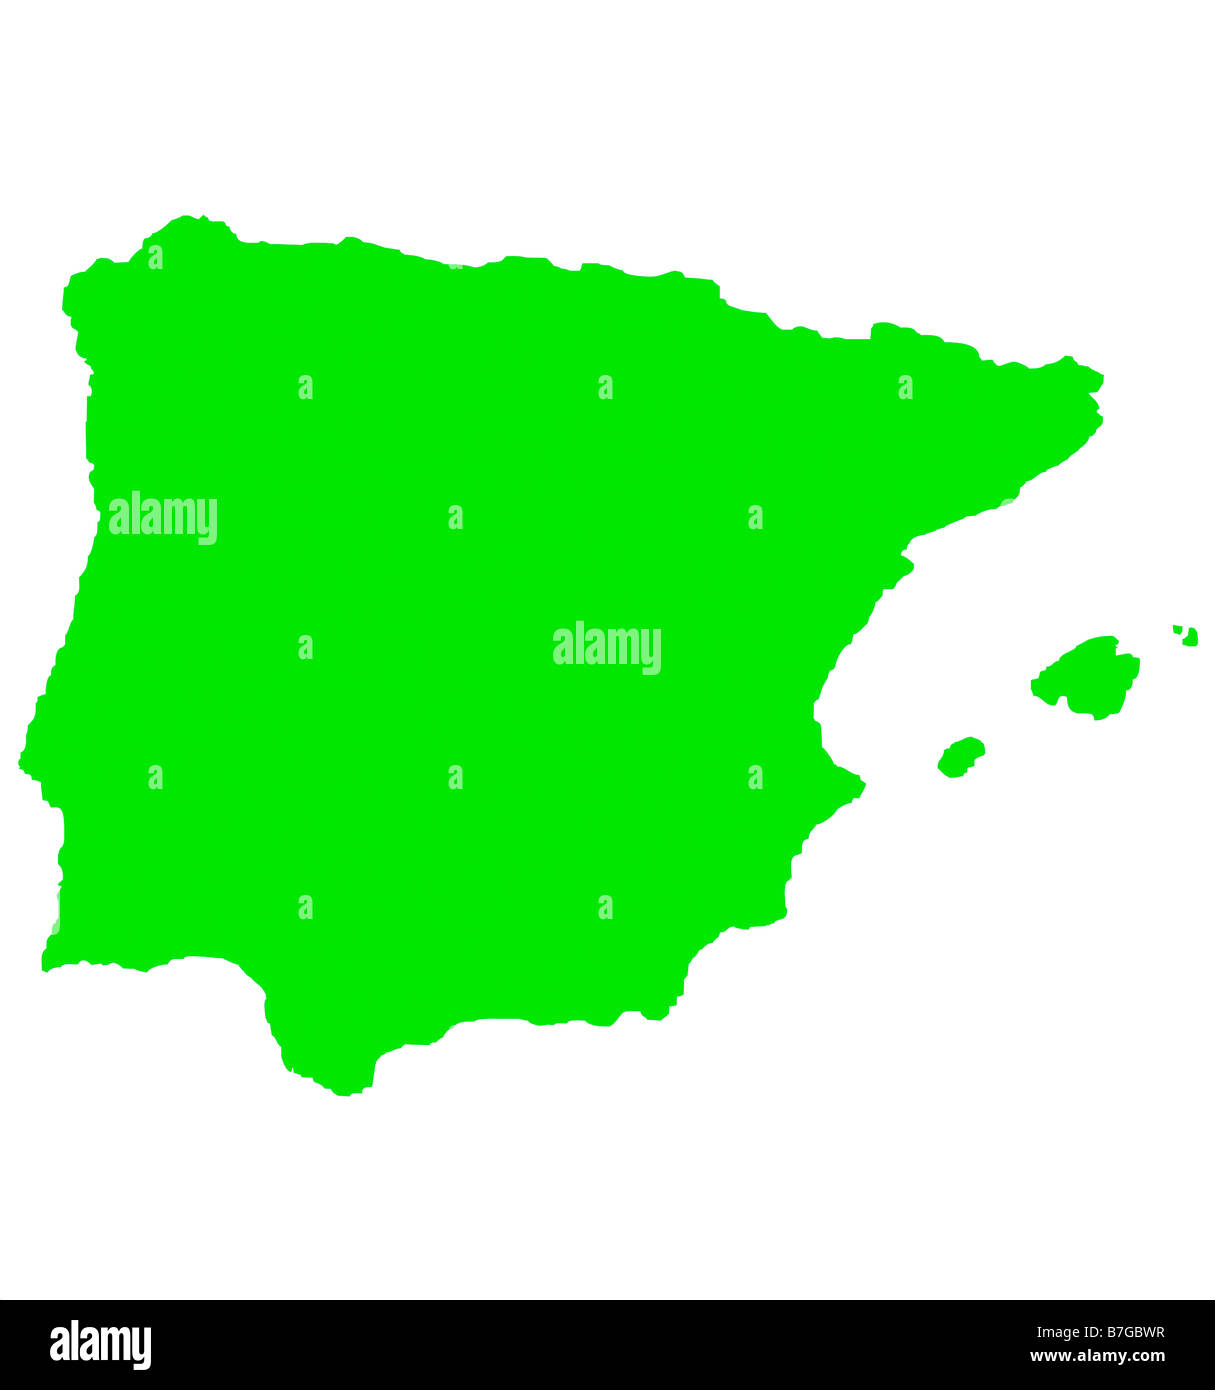 Outline map of Spain and Balearic islands isolated on white background Stock Photo